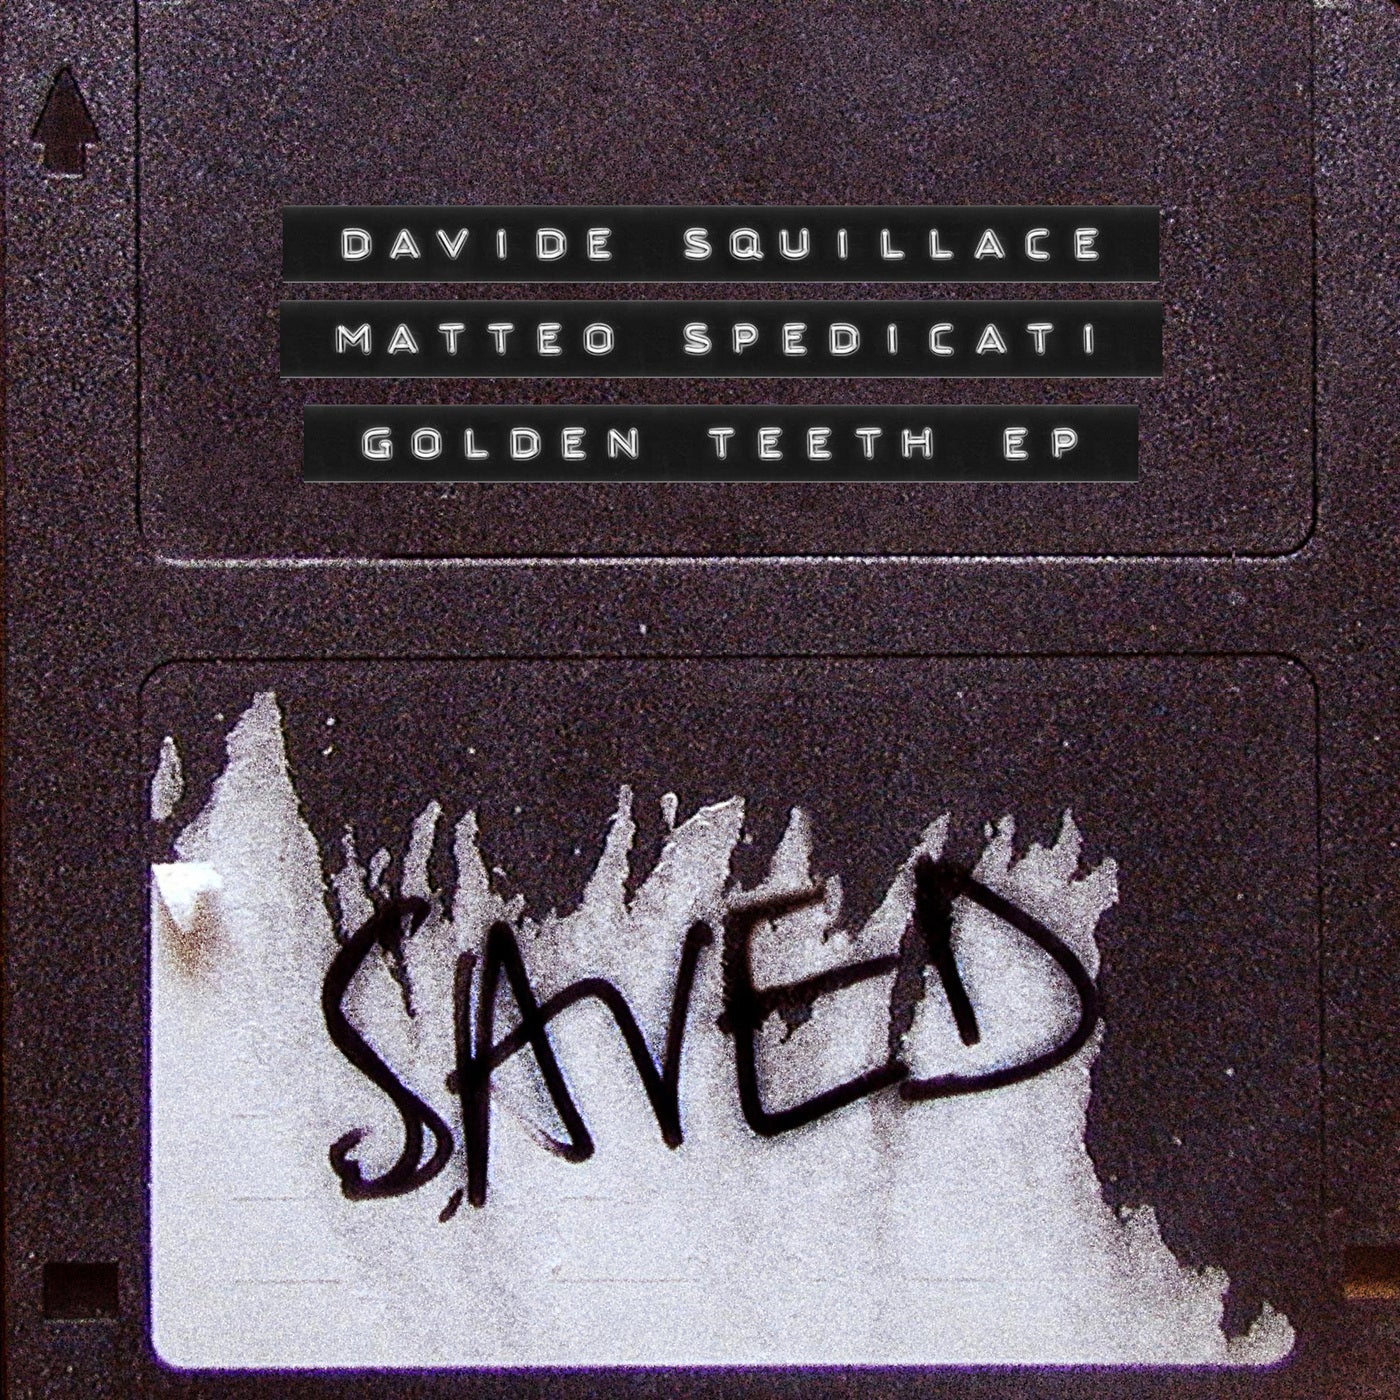 image cover: Davide Squillace, Matteo Spedicati - Golden Teeth EP / SAVED25001Z